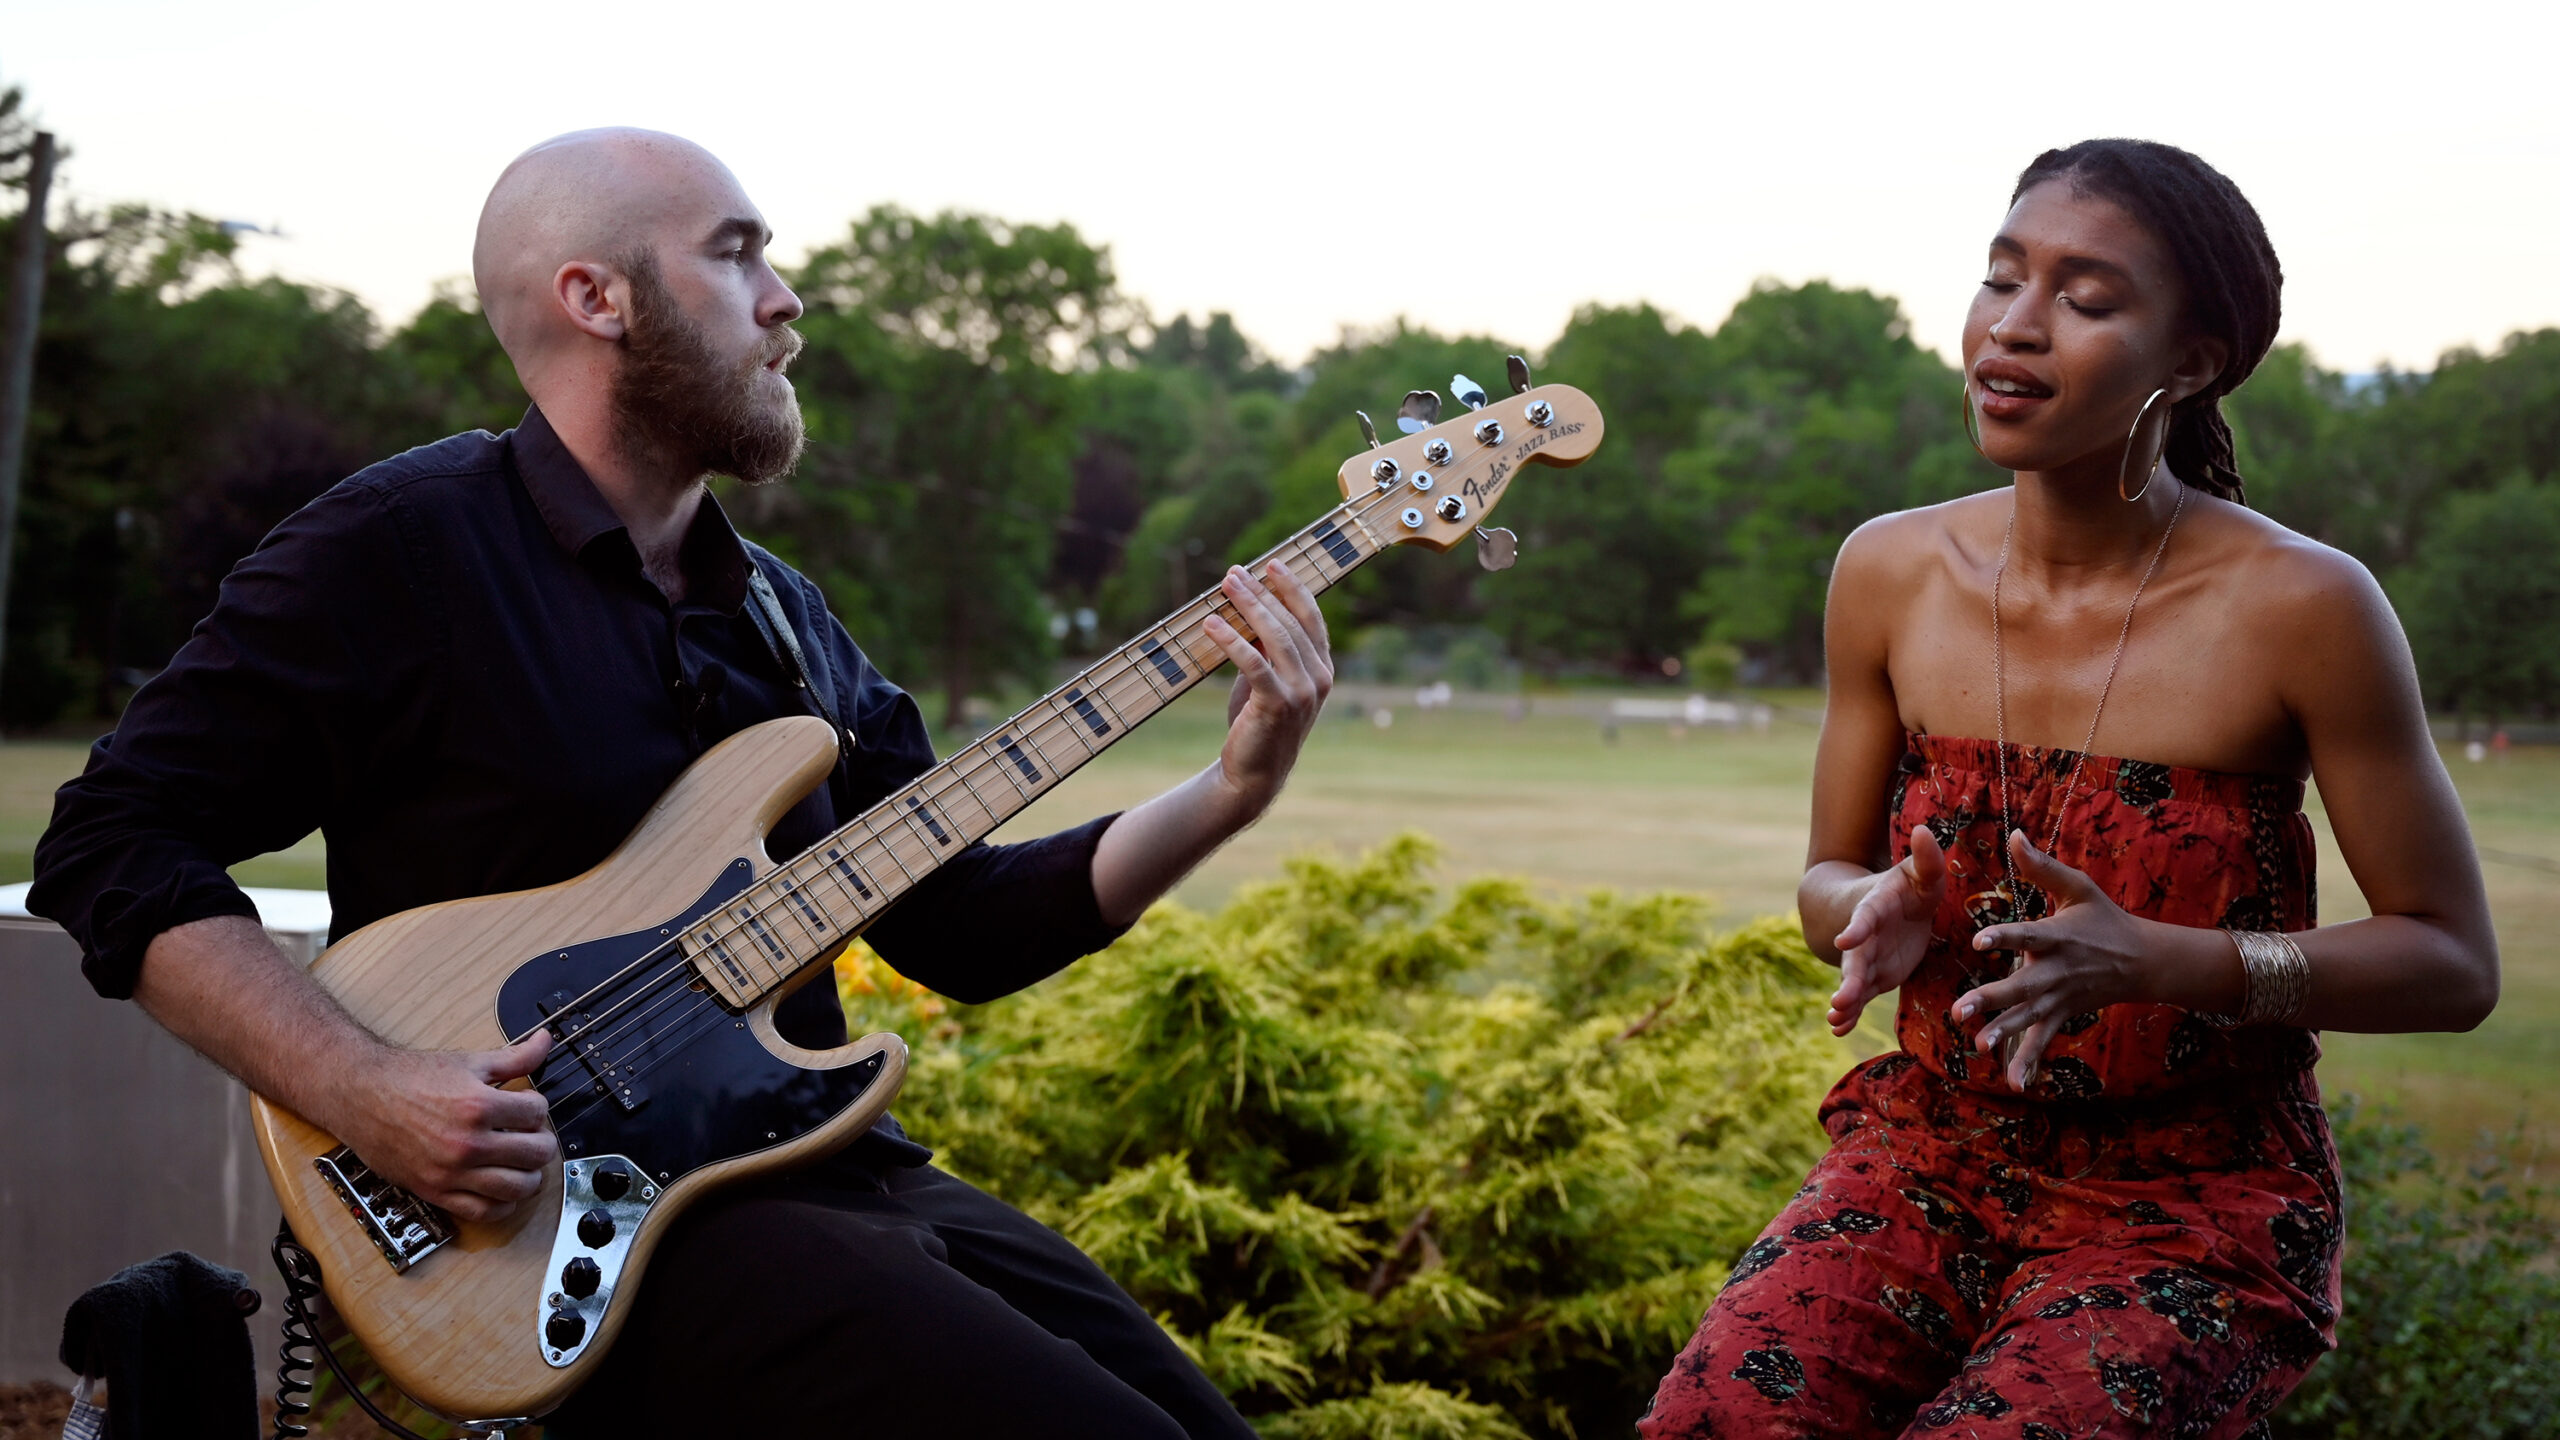 Vocalist Erica T. Bryan and bassist Tom Sullivan of The New Mosaic perform their song "Out of Body" at Elizabeth Park. Julianne Varacchi/Connecticut Public